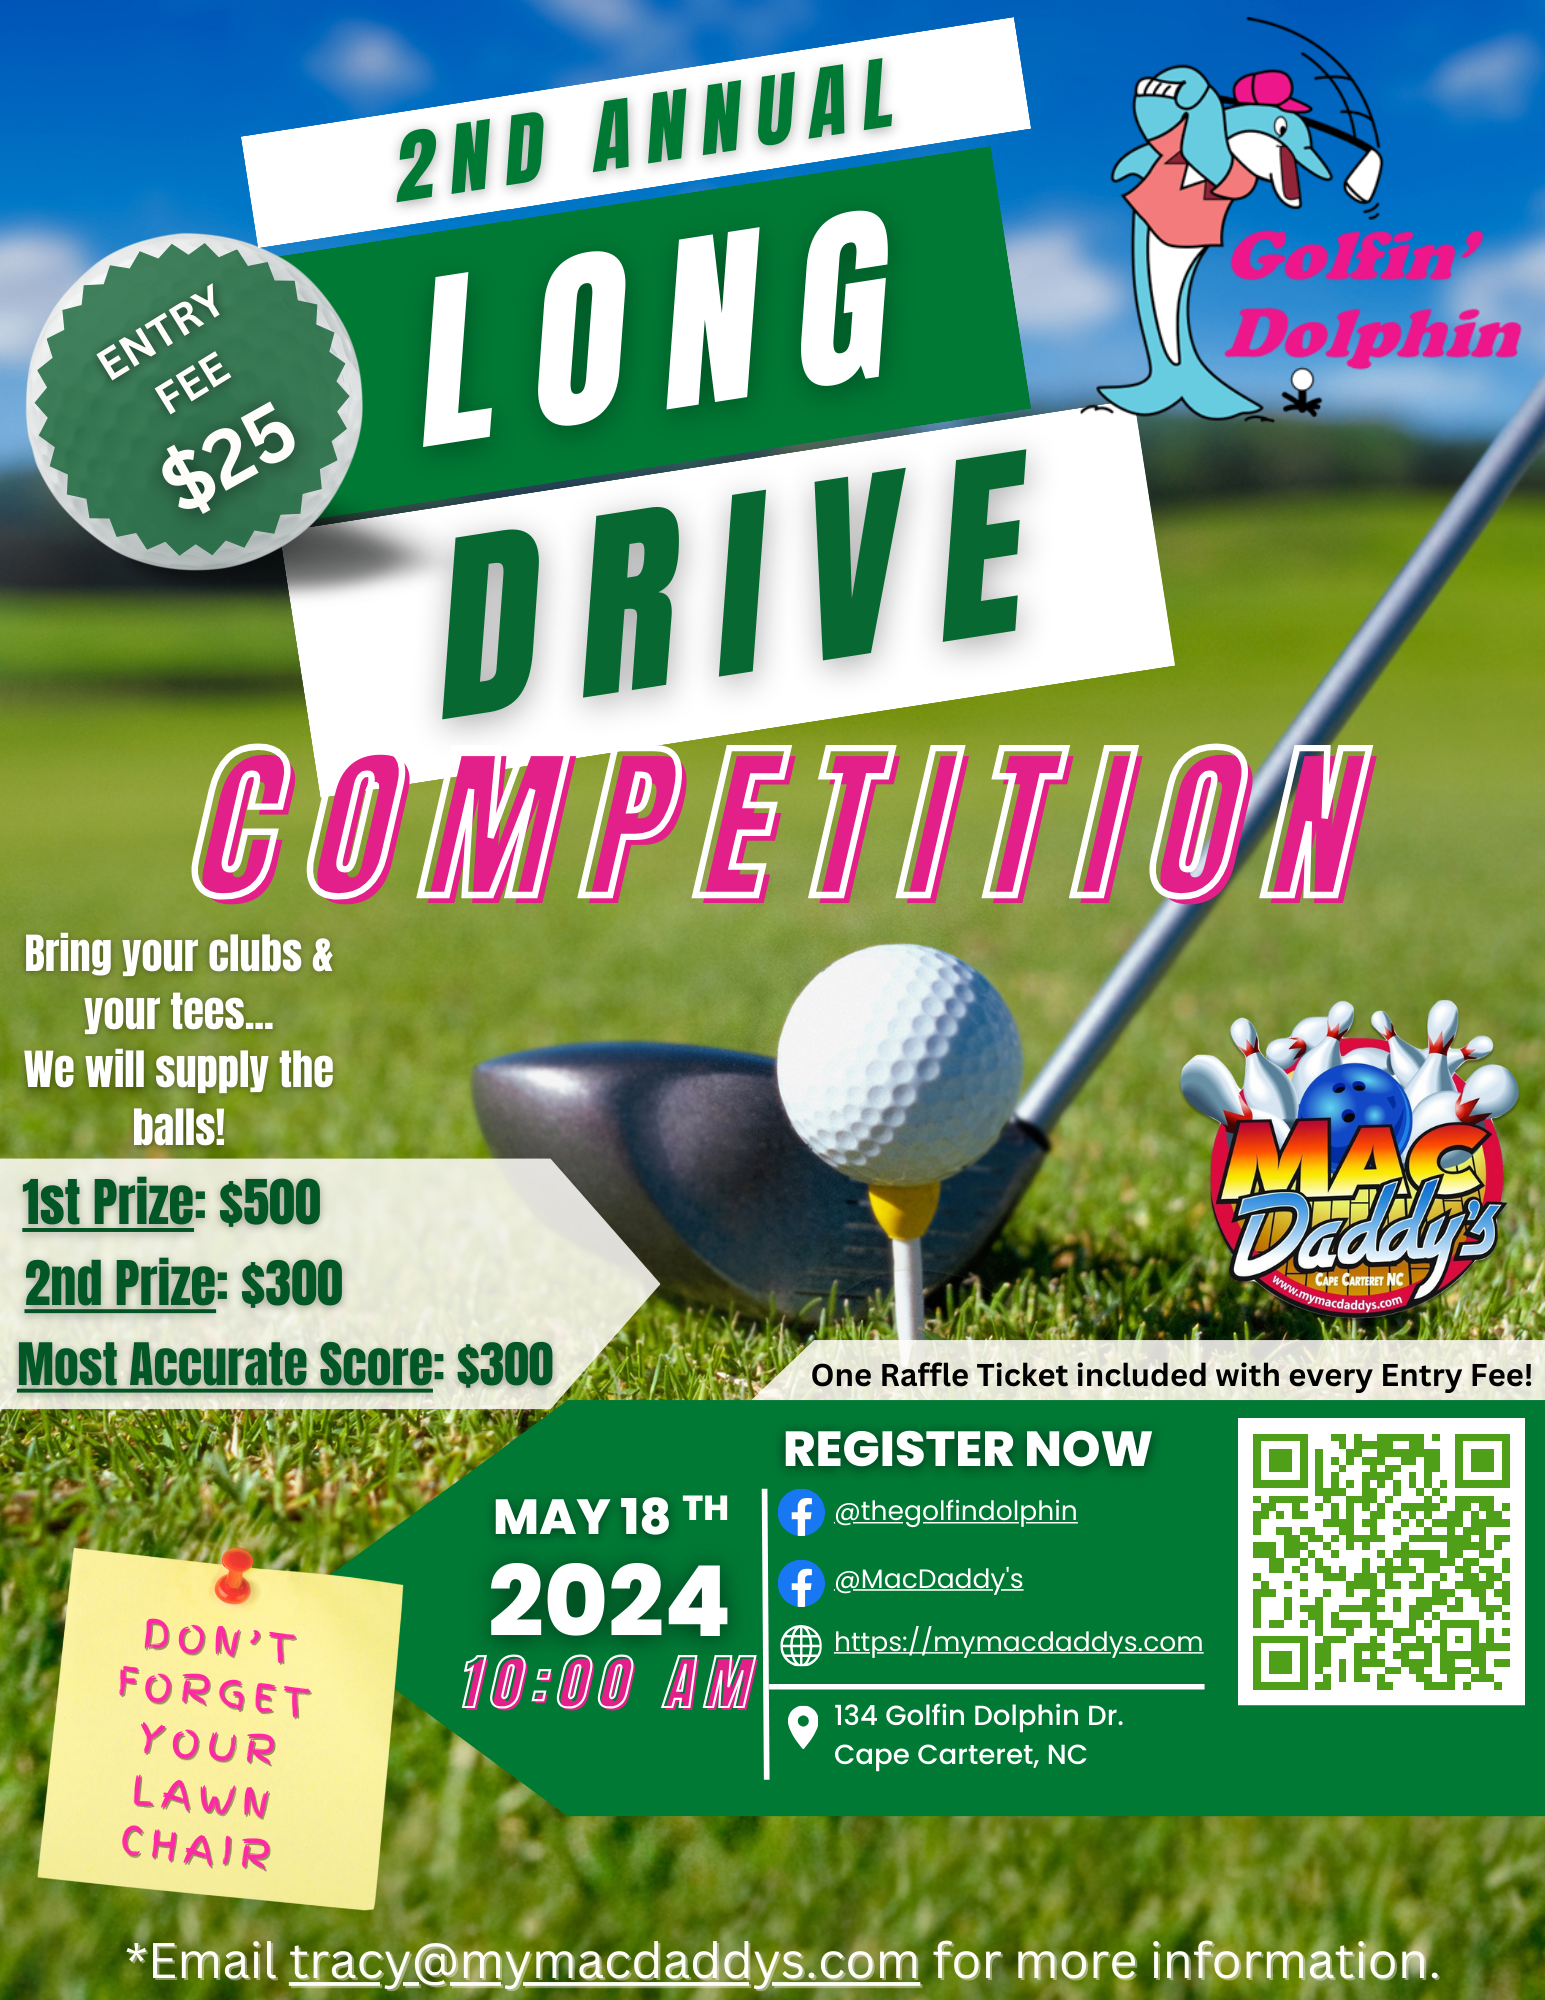 2nd Annual Long Drive Competition